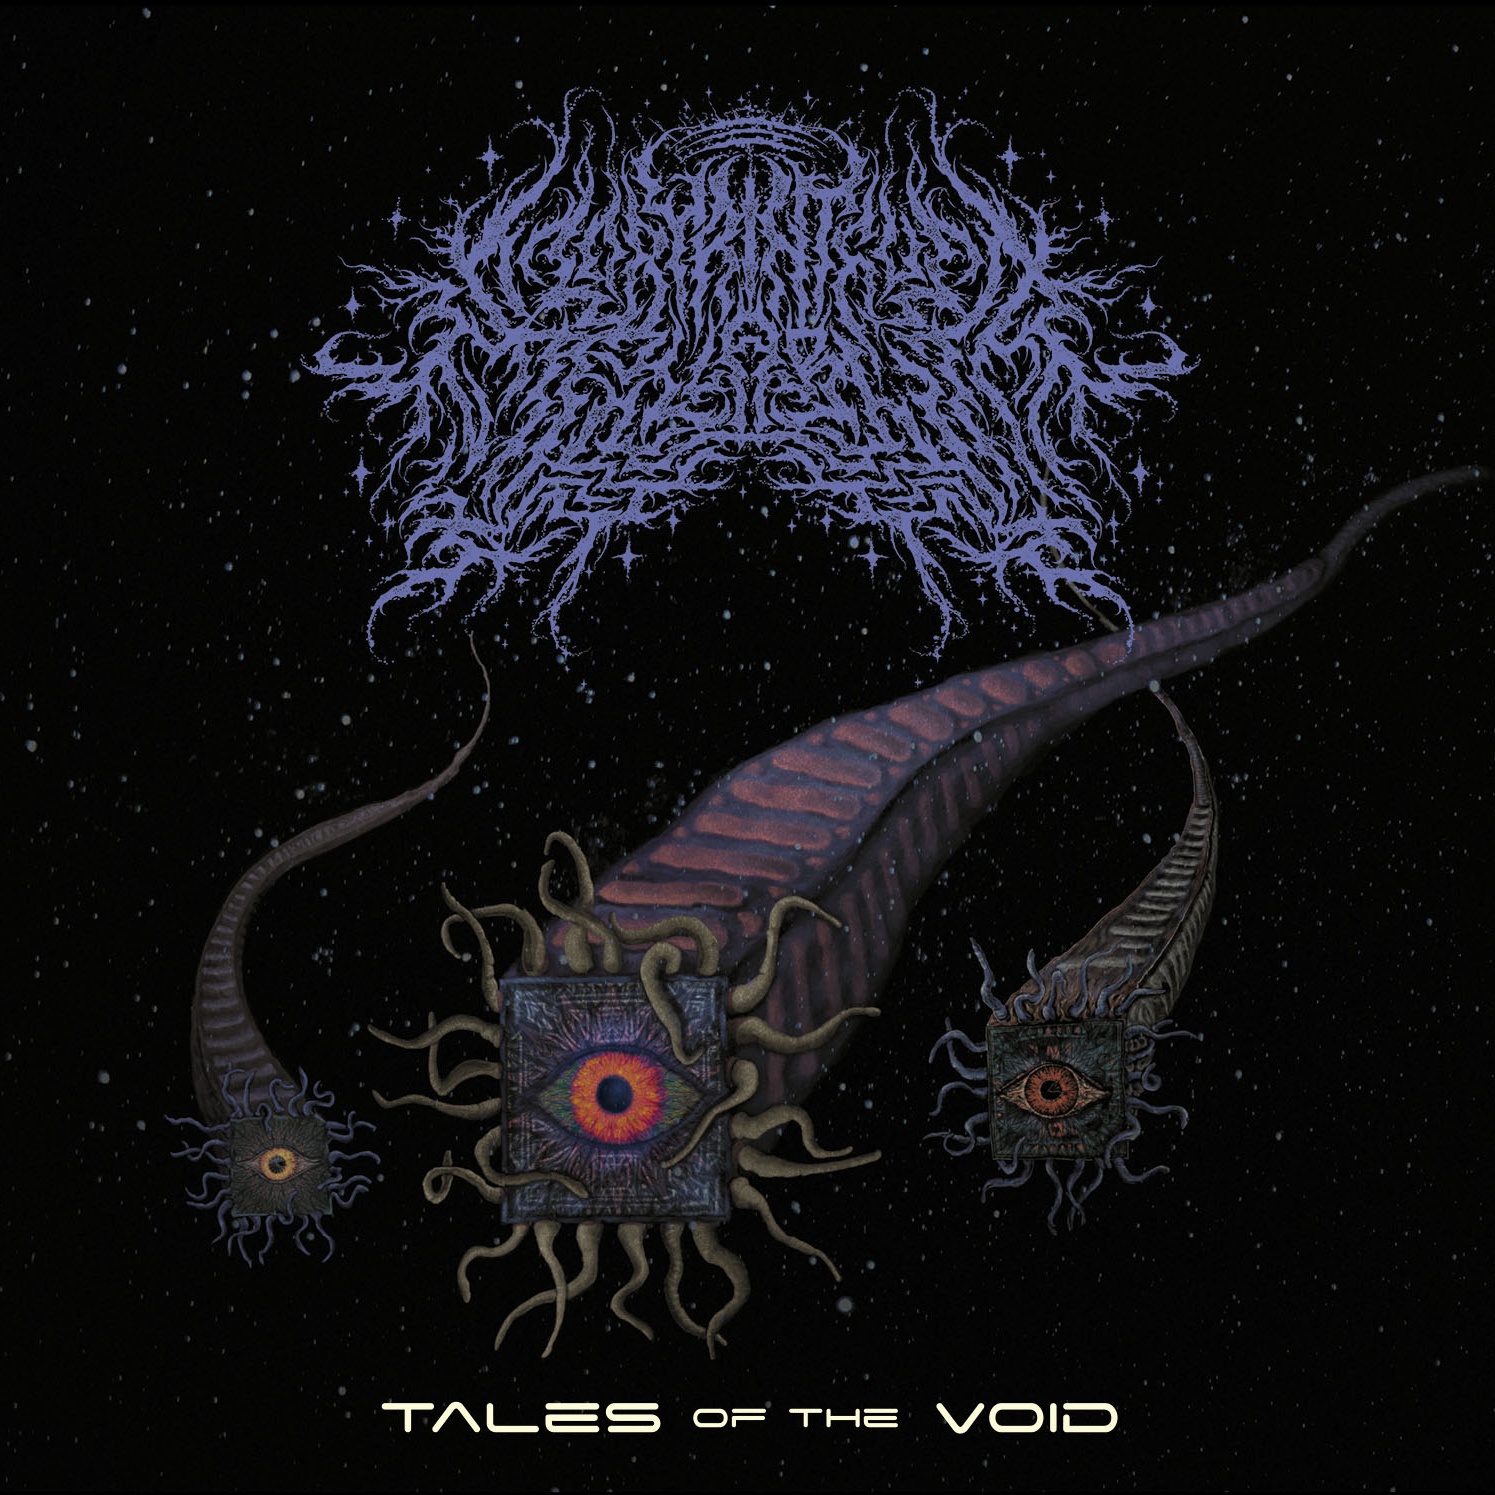 New releases – LABYRINTHUS STELLARUM “Tales of the Void”